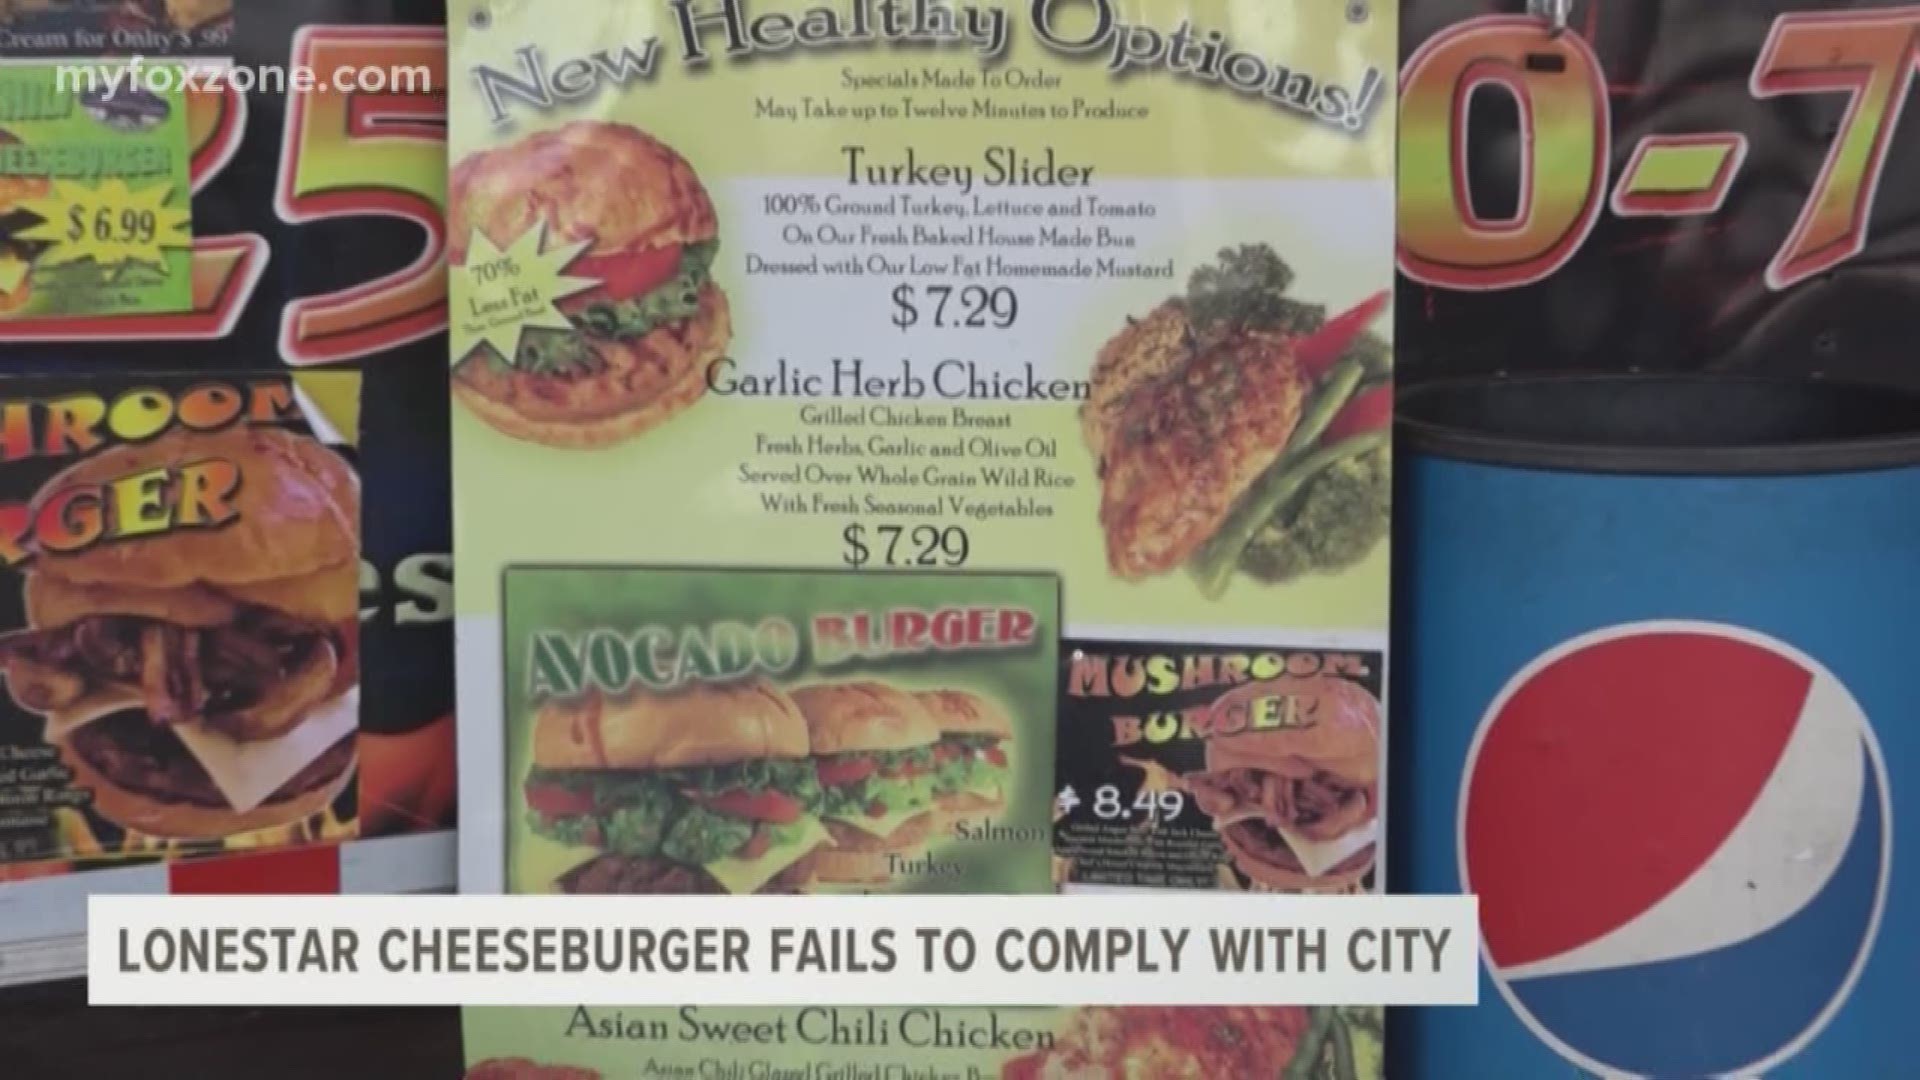 Lonestar Cheeseburger fails to comply with city.